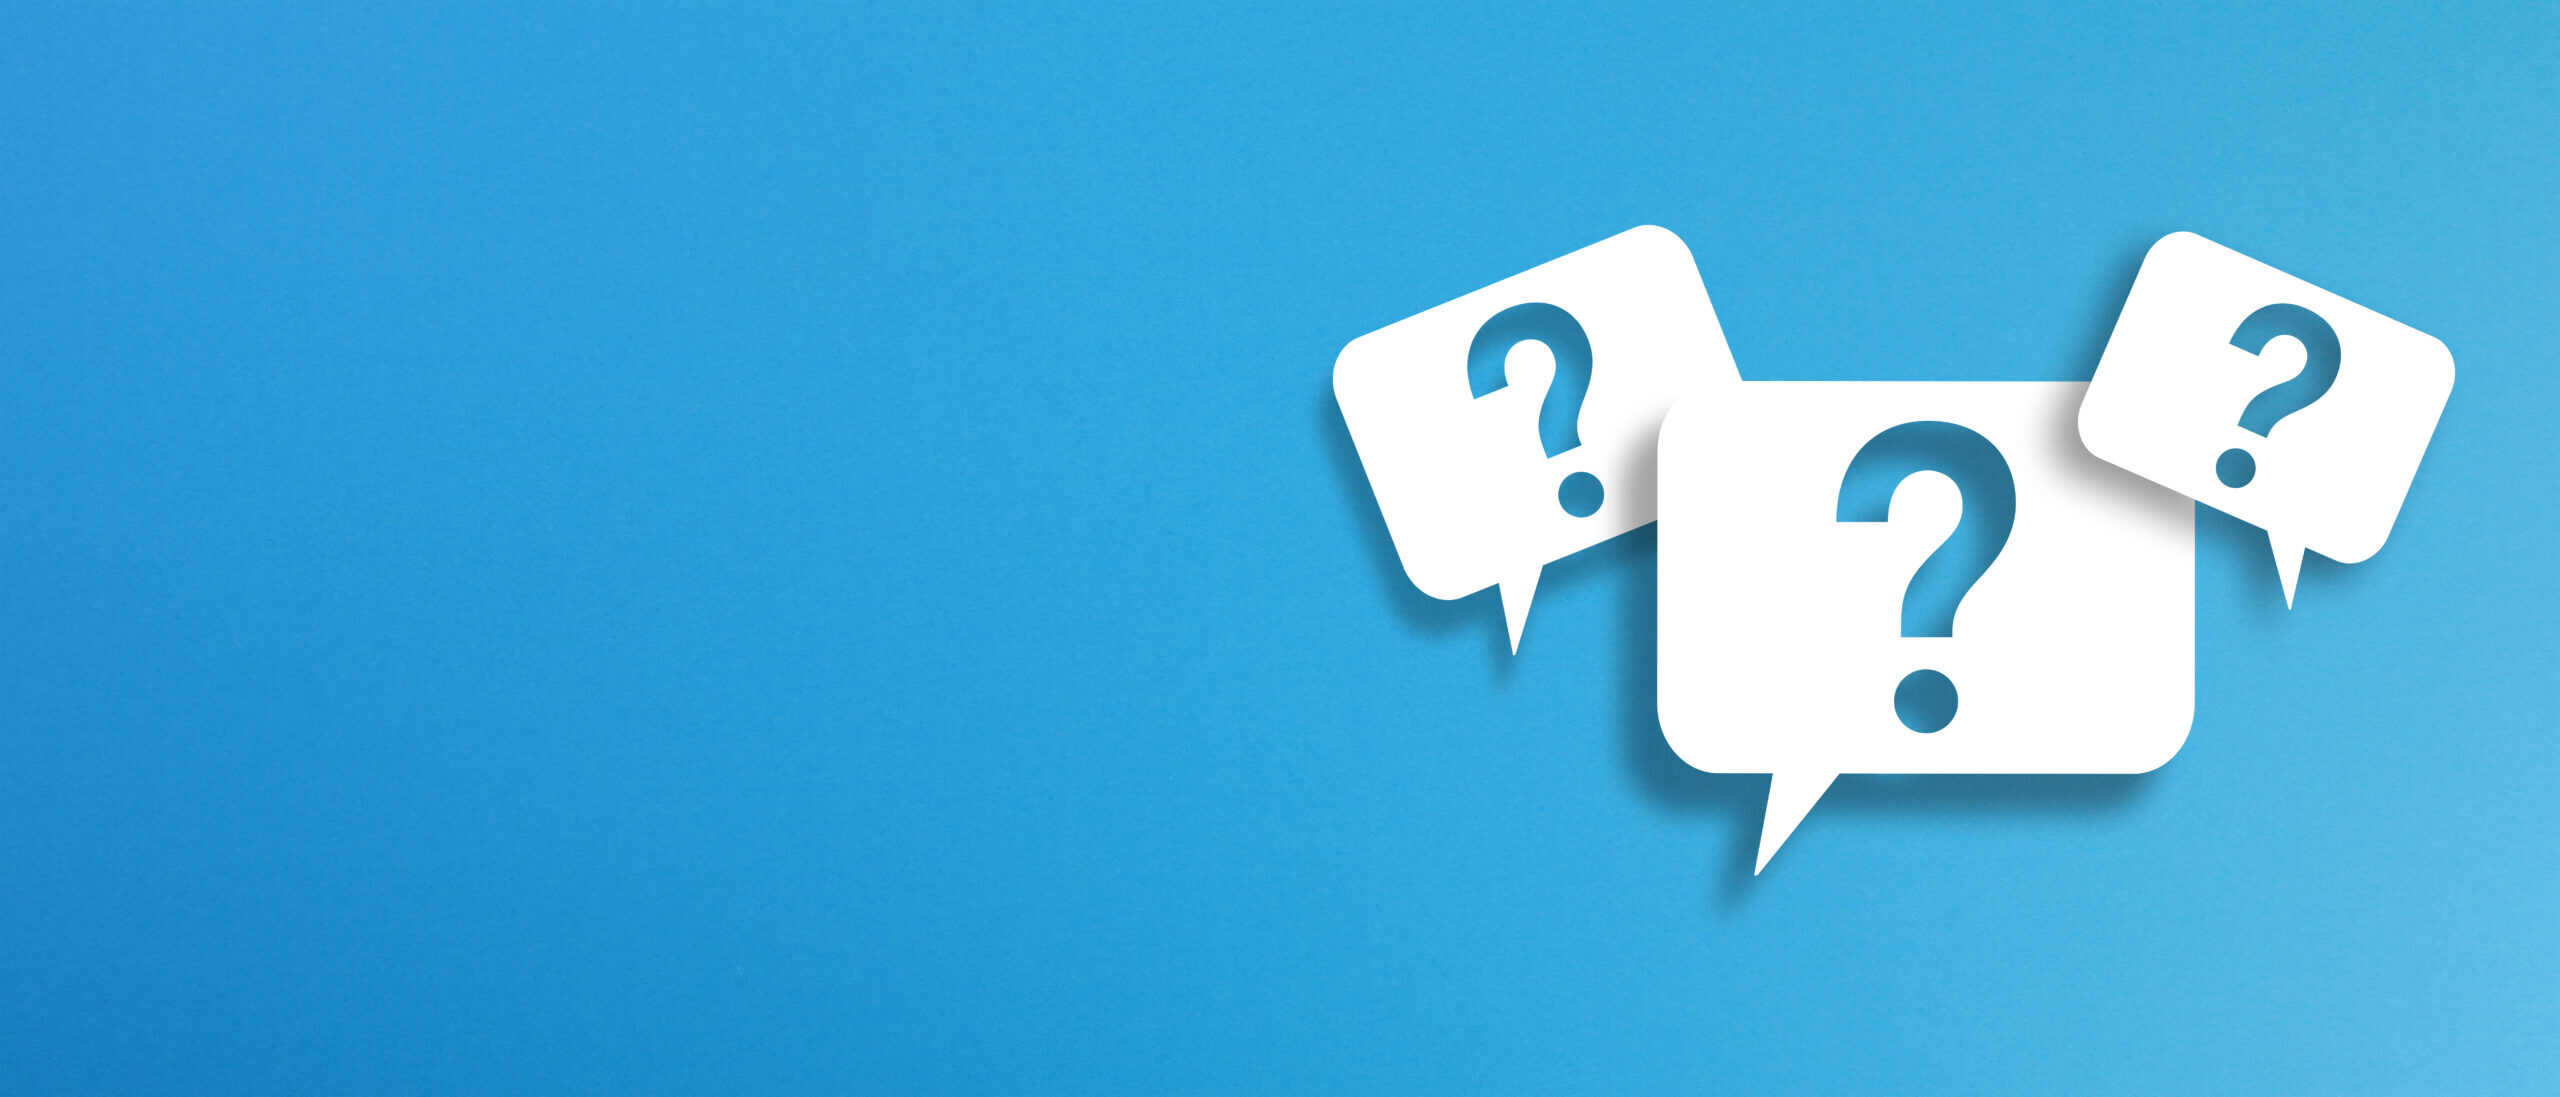 Question marks with speech bubbles on blue background